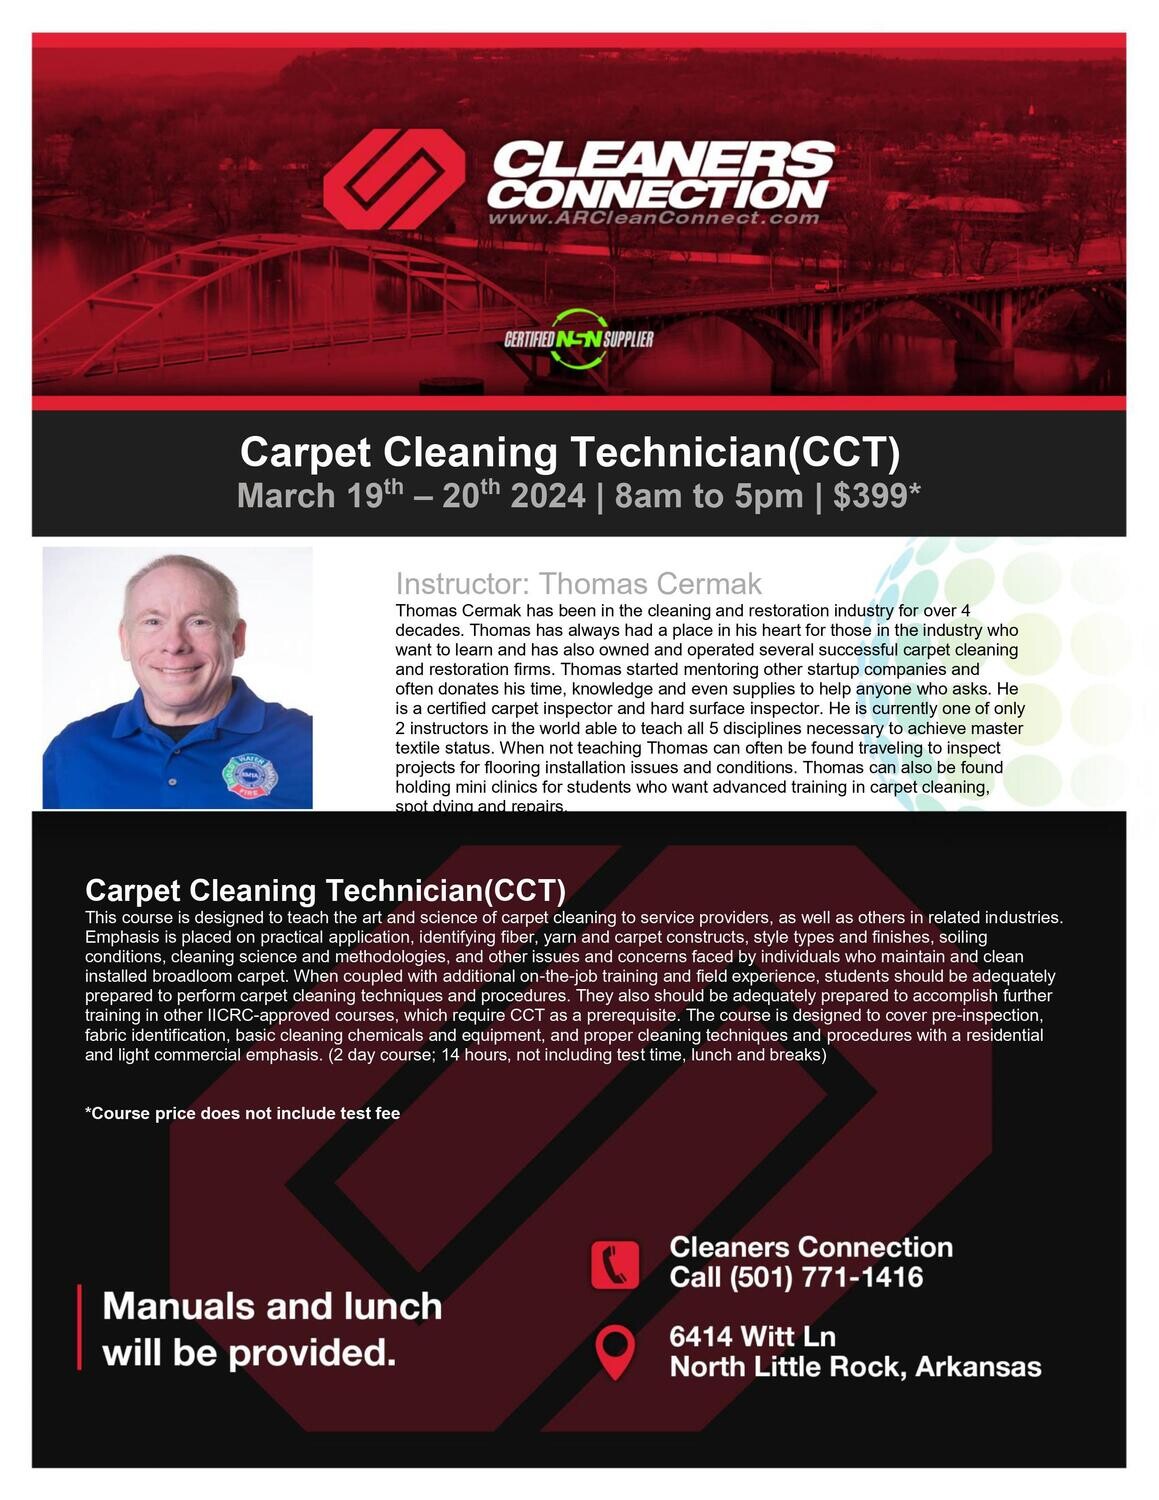 Carpet Cleaning Technician Course  March 19th-20th. 2024